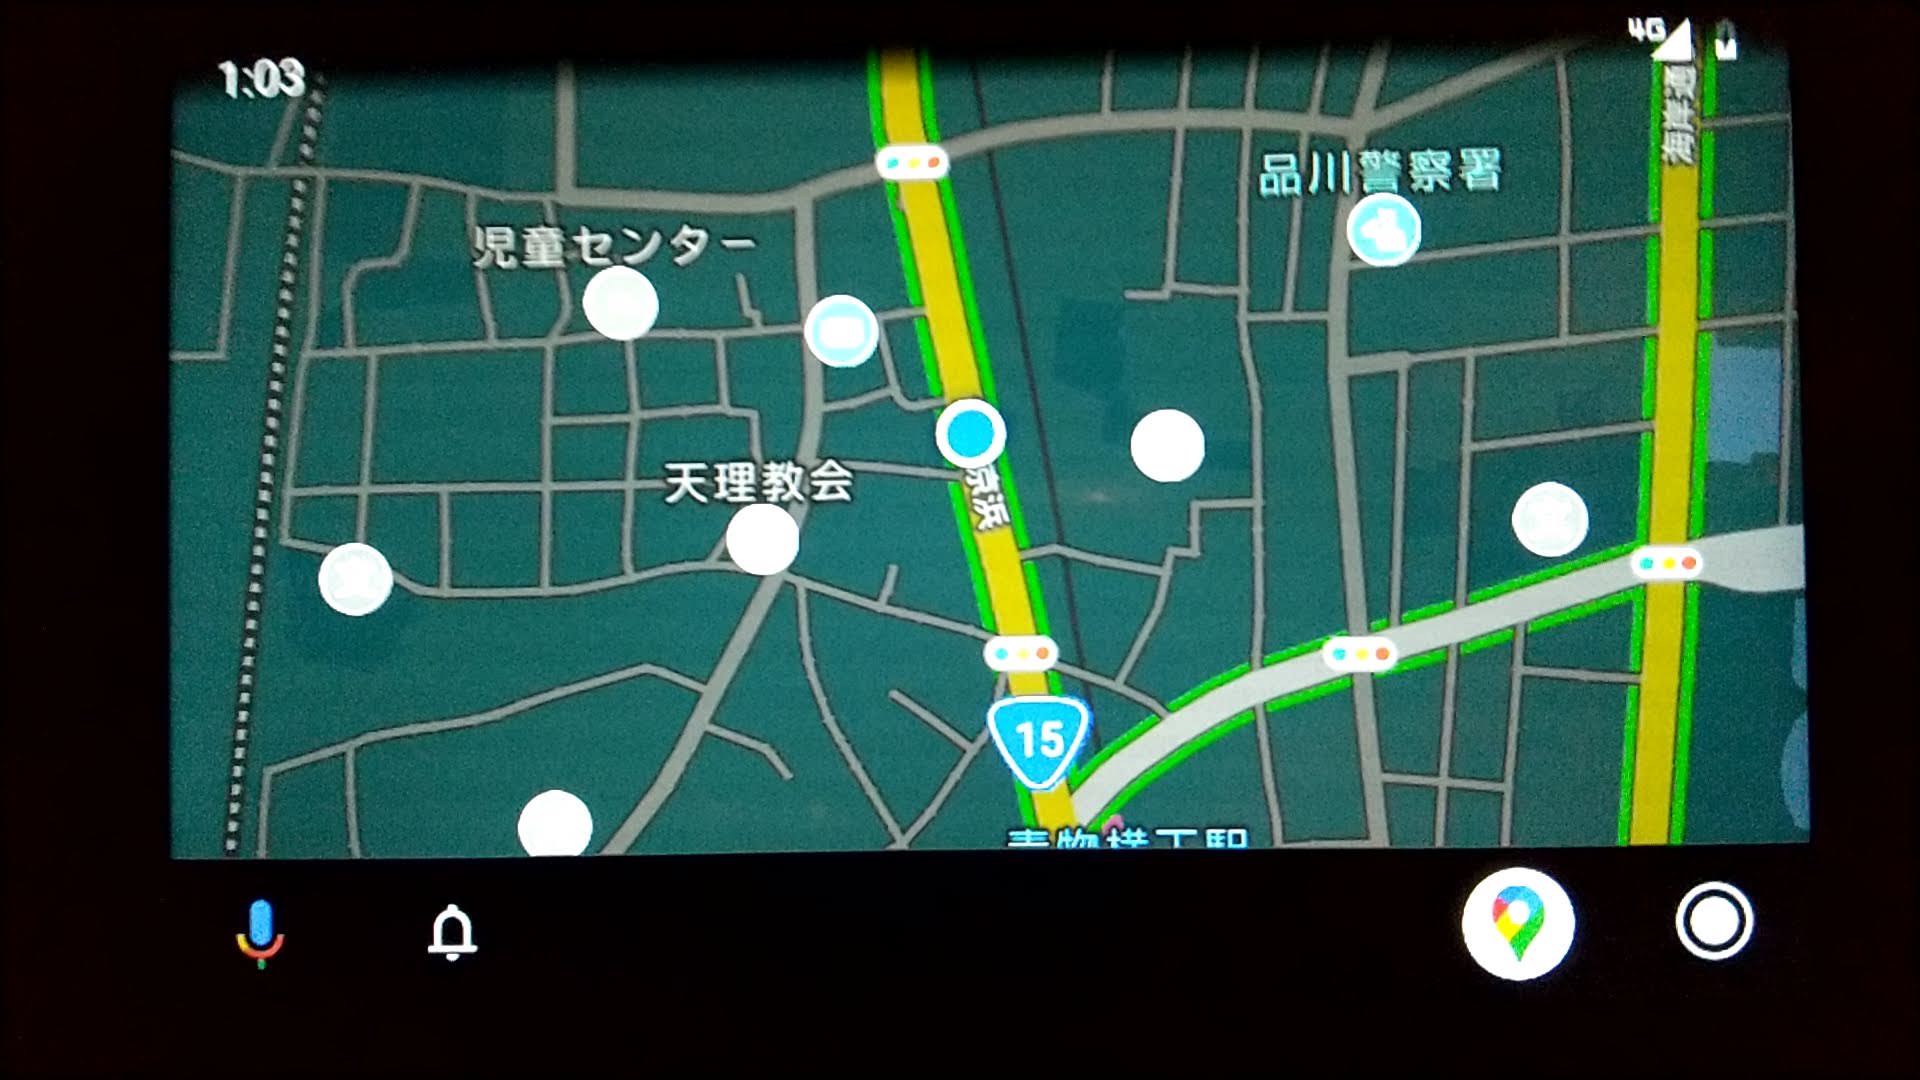 moviLink　Android Auto　車内ディスプレイで